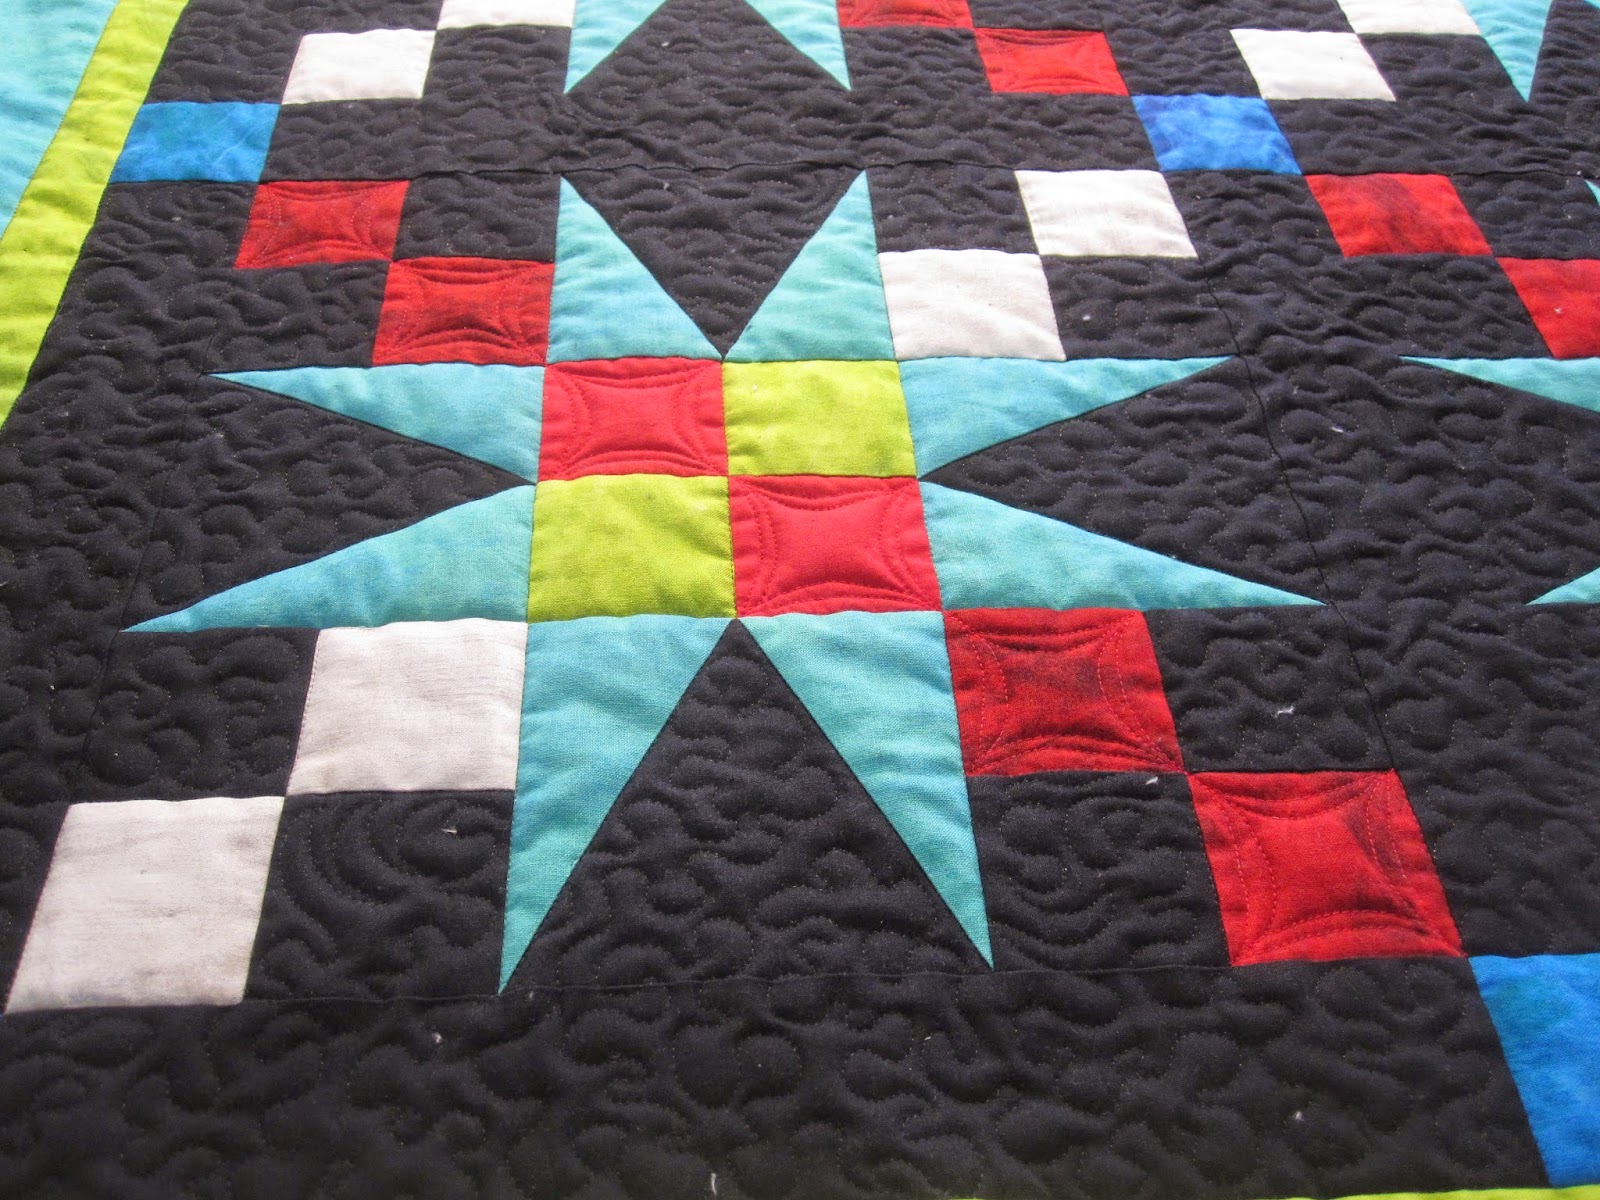 A teflon sheet for FMQ--do it yourself Supreme Slider!  Free motion  quilting, Free motion quilting patterns, Quilts